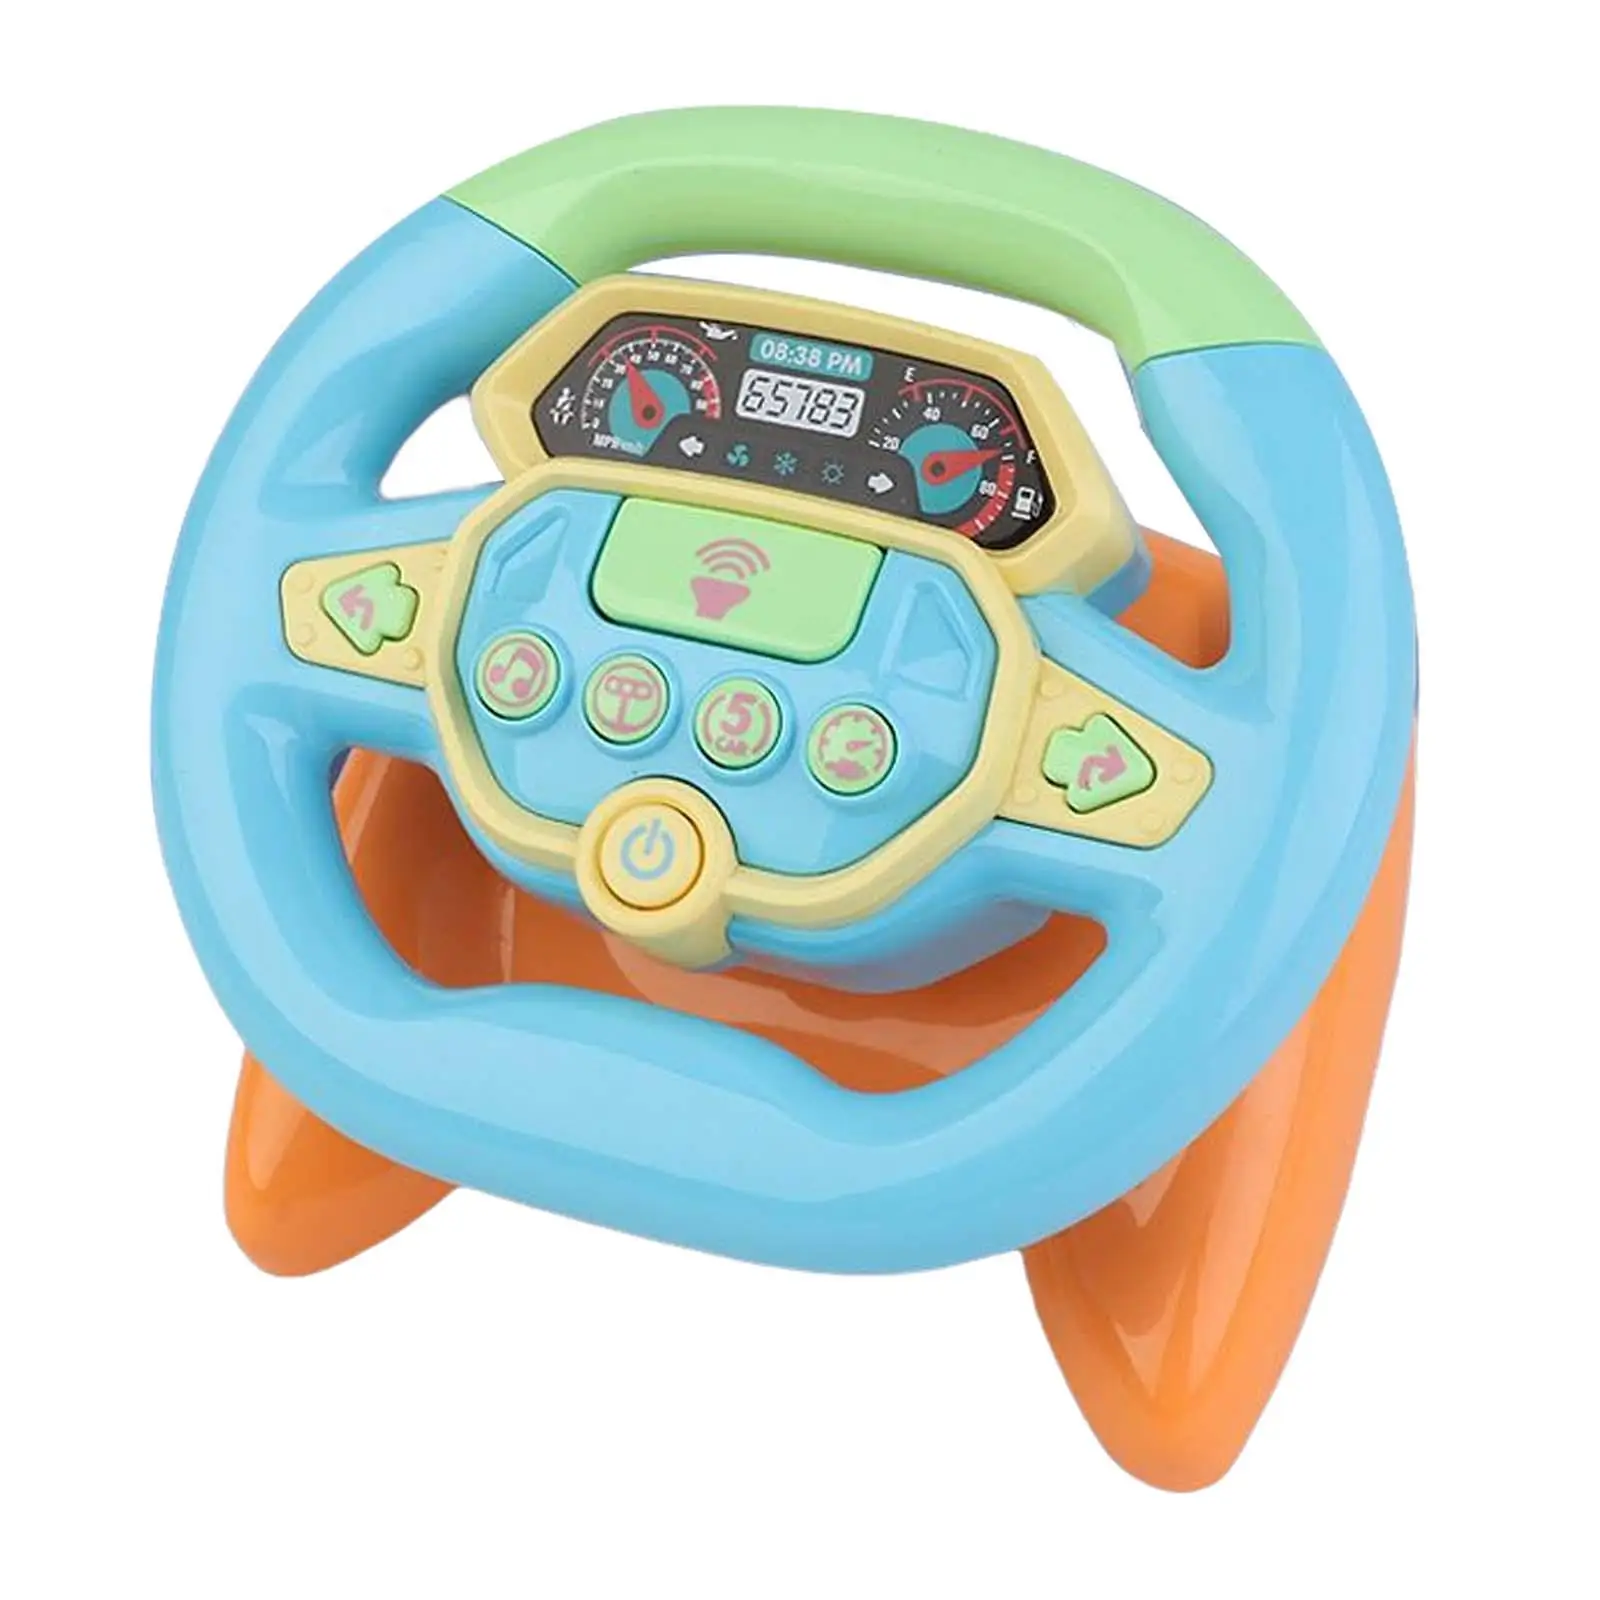 90 Degree Rotation Cars Simulation Steering Wheel Toy Educational Toys Pretend Driving Toy Boys Leisure Driving Controller Girls